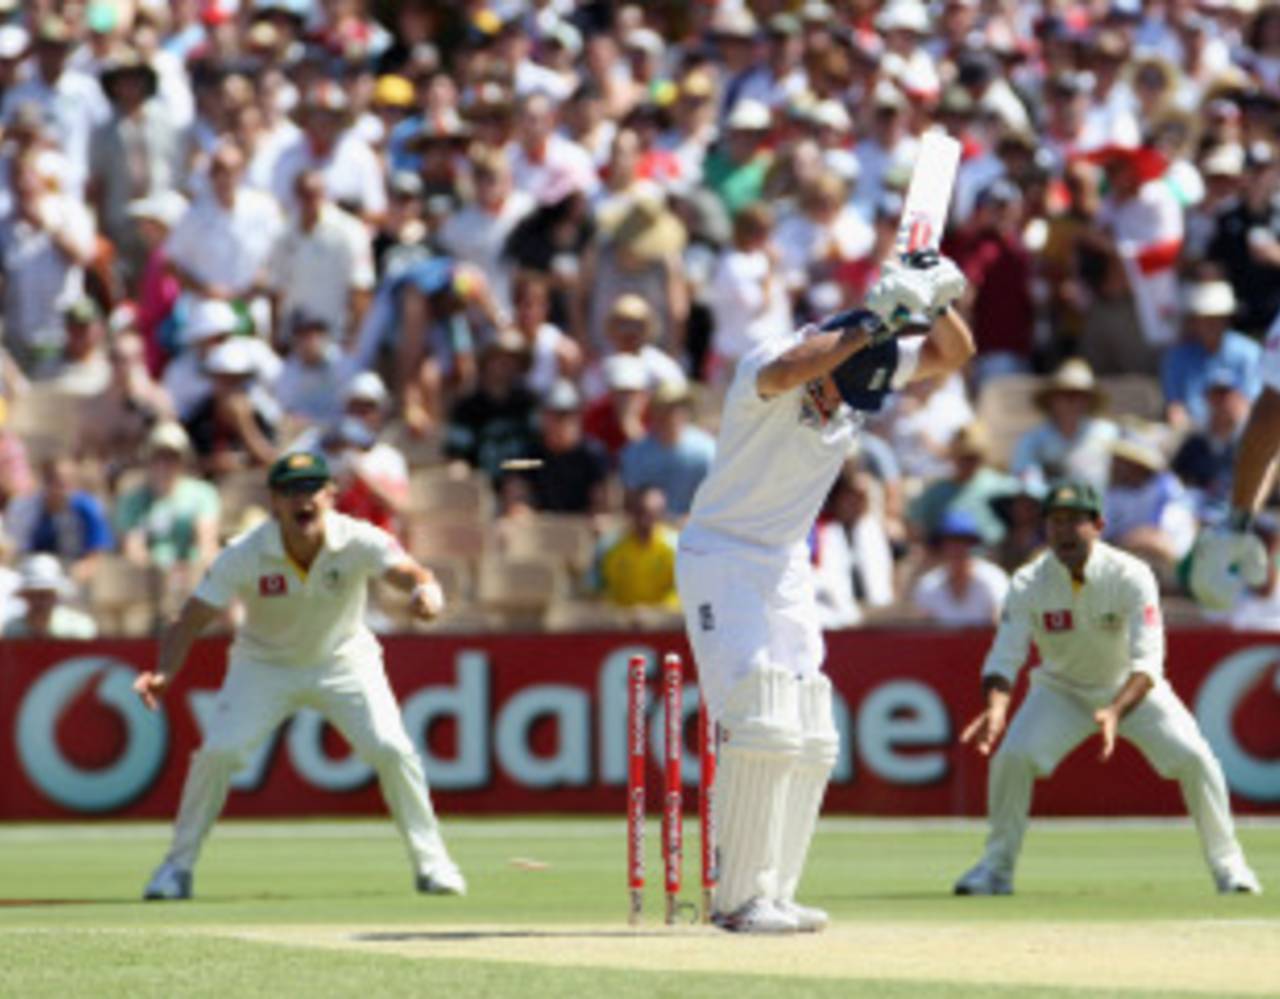 Andrew Strauss is bowled after leaving a ball from Doug Bollinger, Australia v England, 2nd Test, Adelaide, 2nd day, December 4, 2010